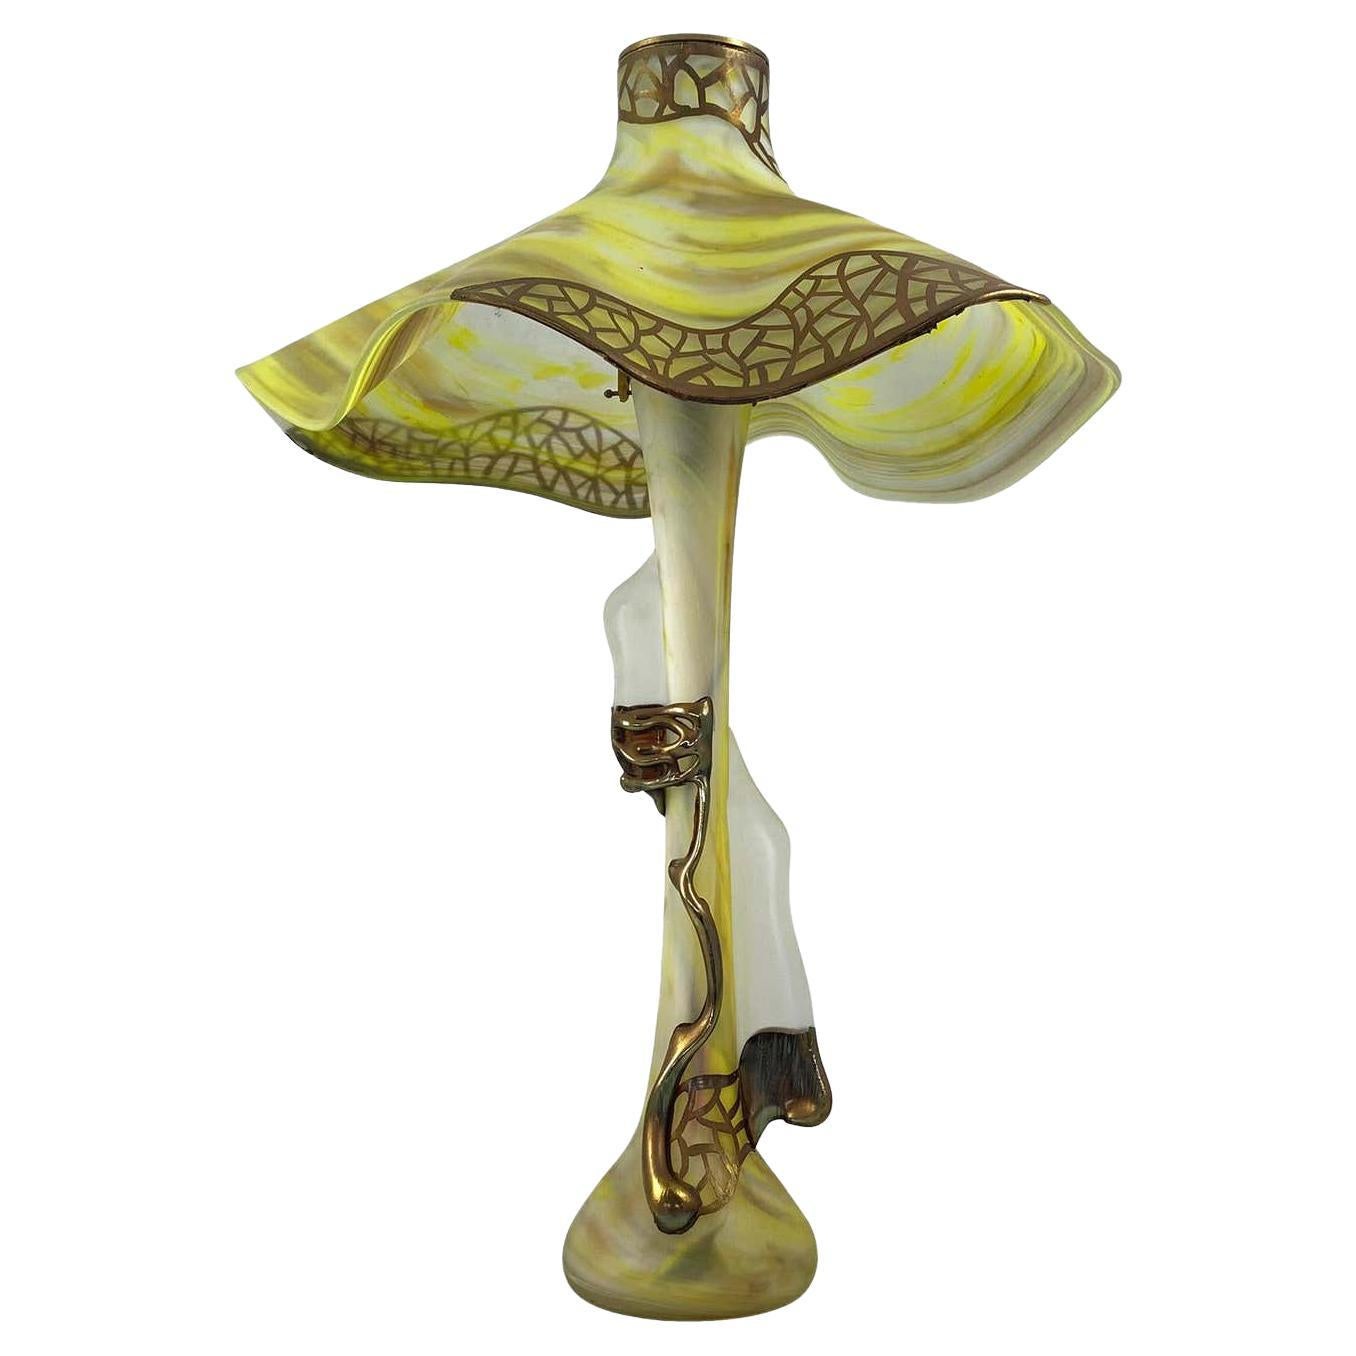 20th Century Unusual Art Glass Table Lamp in Art Nouveau Style